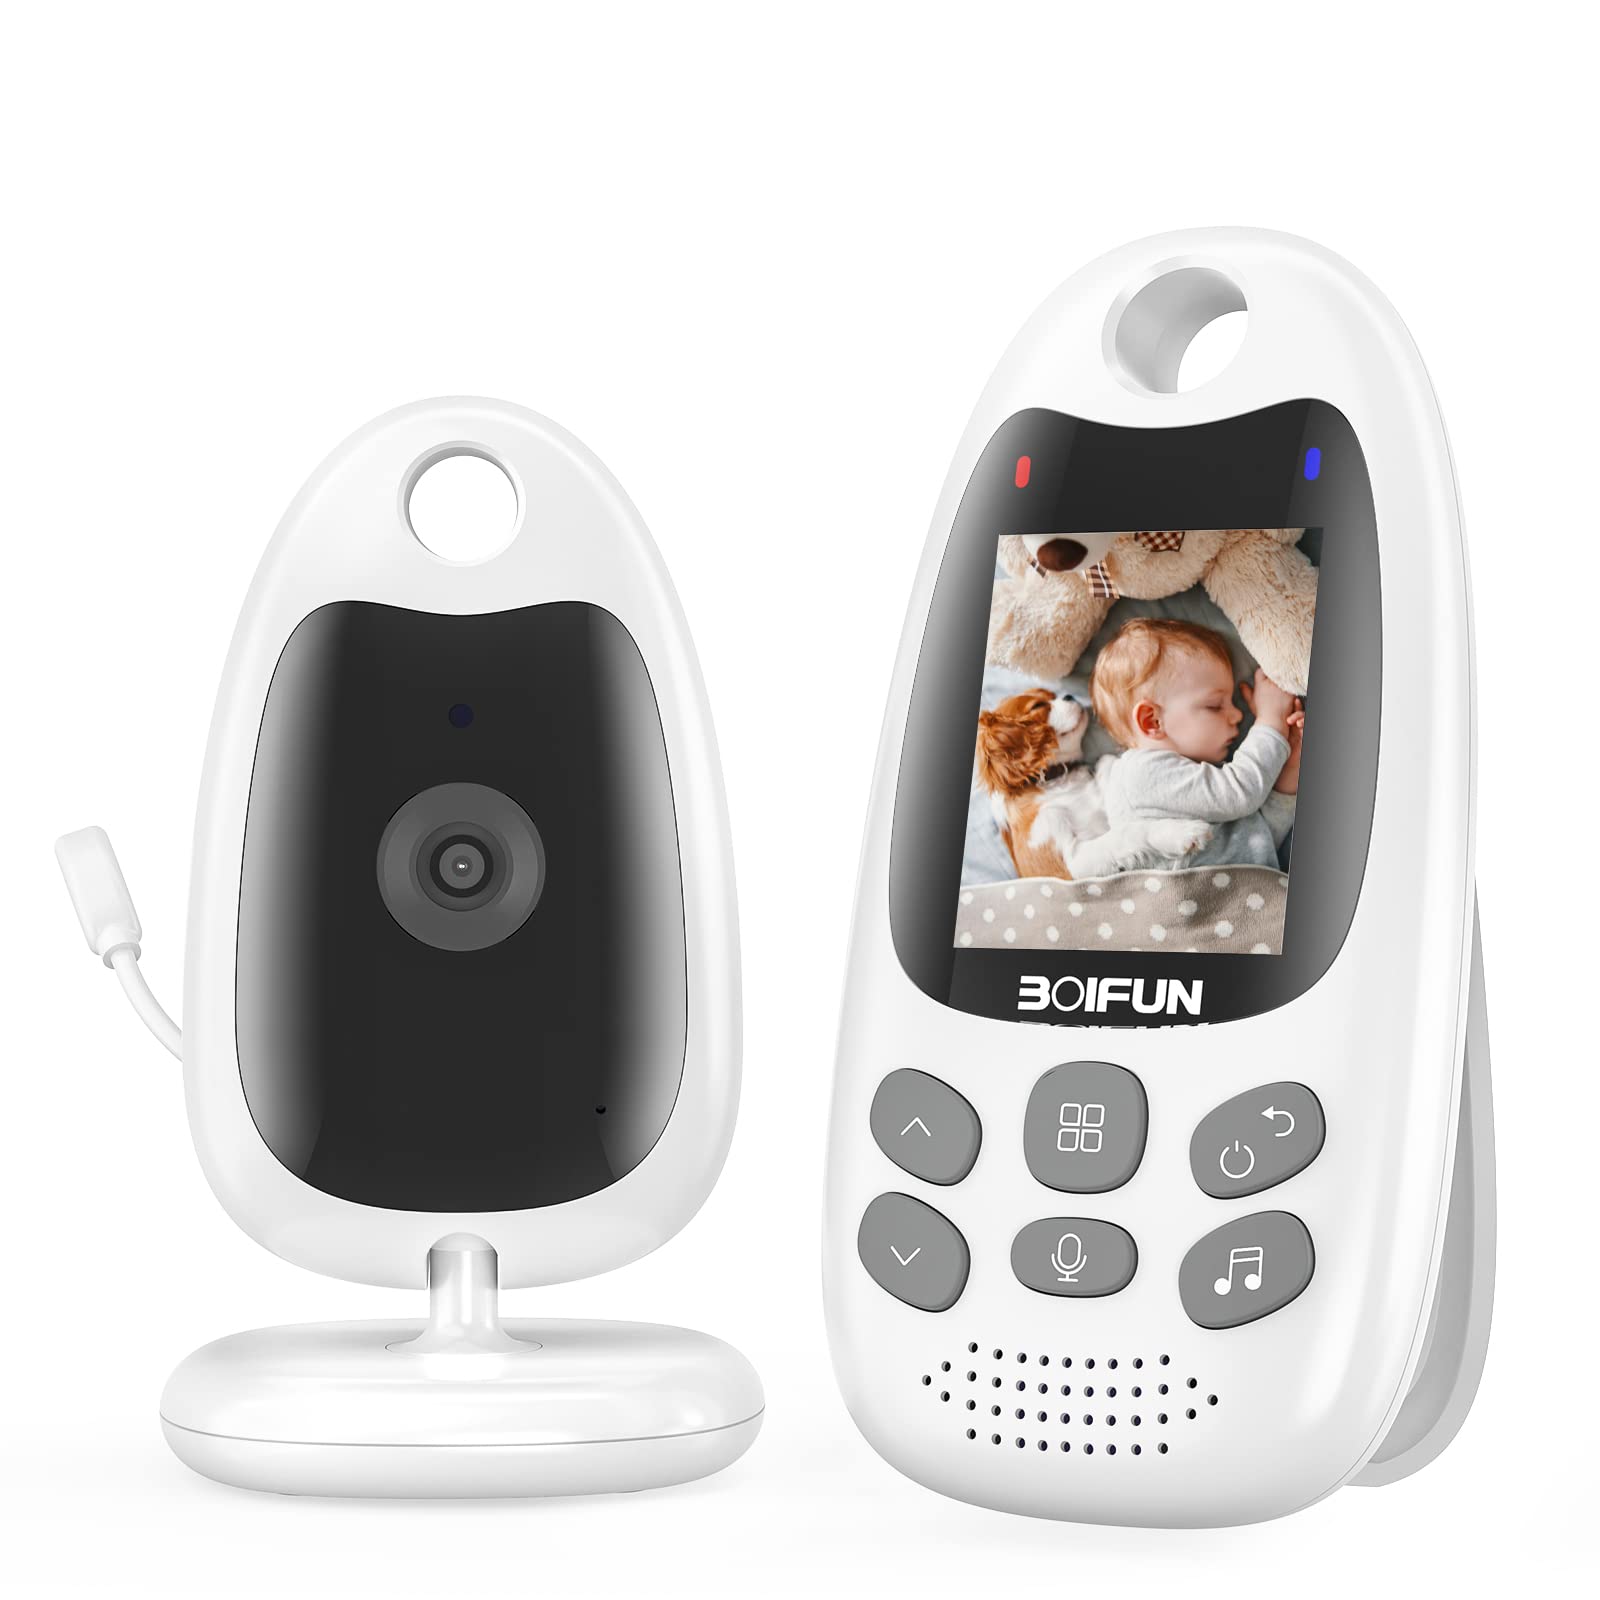 Baby Monitor with Camera, Wireless Video Baby Monitor with 2 inch LCD Screen, VOX Mode, Rechargeable battery, Night Vision, Two-way Talk, Feeding Reminder, Temperature, 8 Lullabies, Baby/Elder/Pet